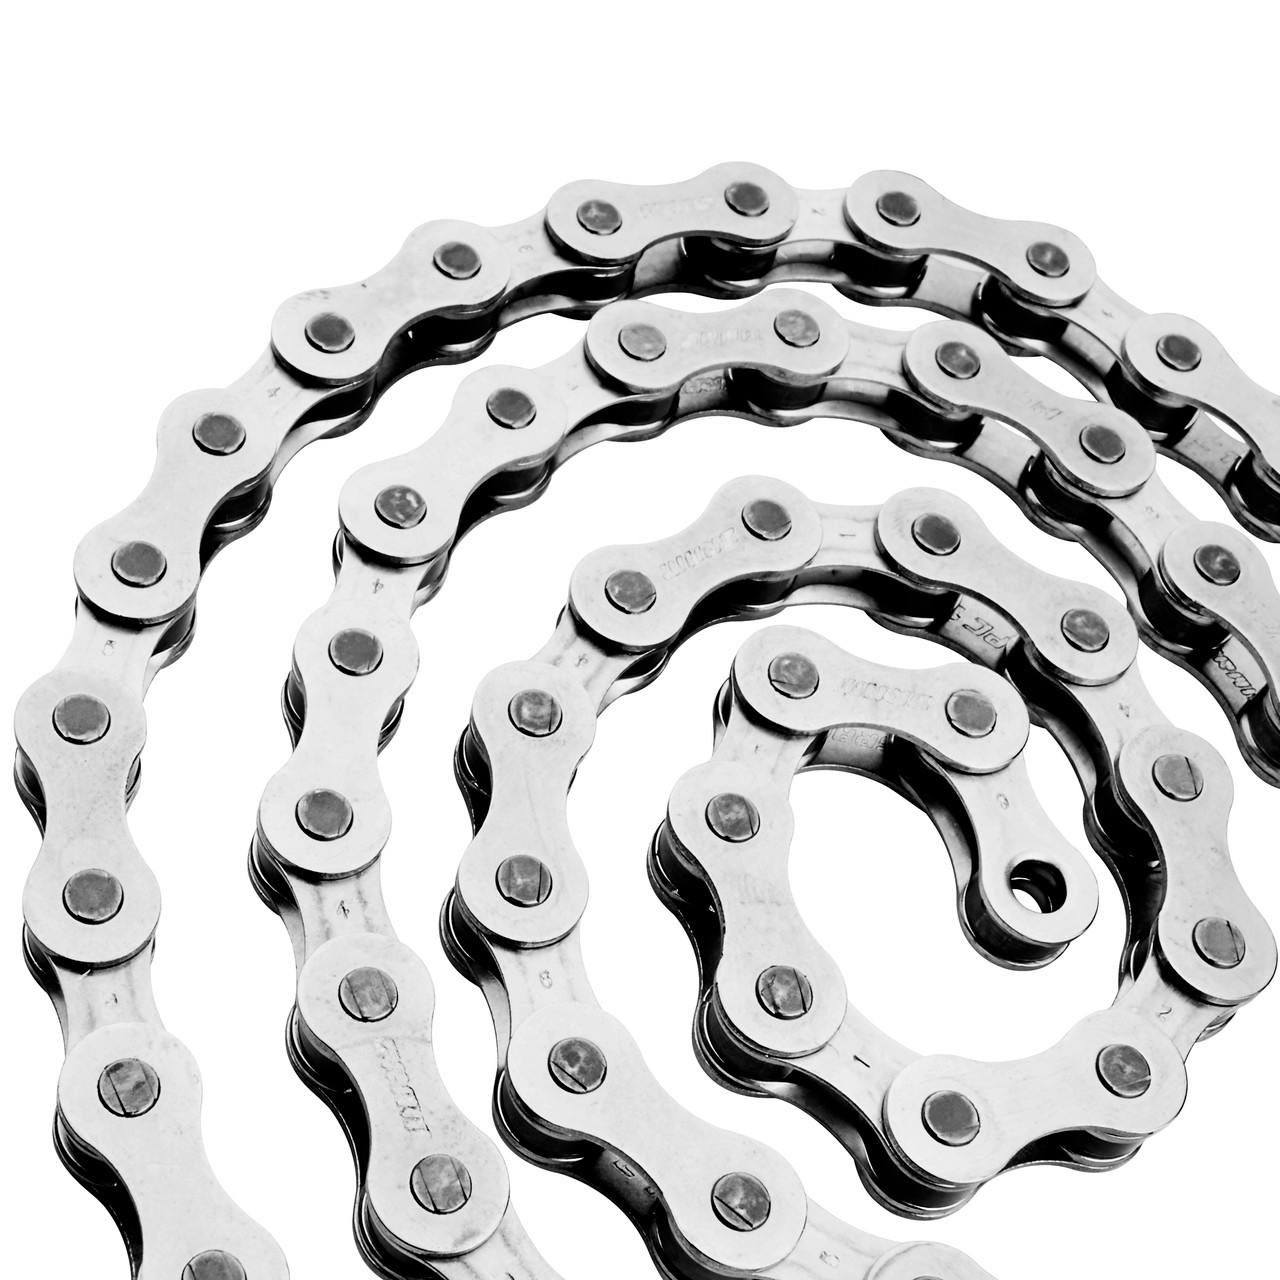 PC 1 Single Speed Cycling Chain Silver